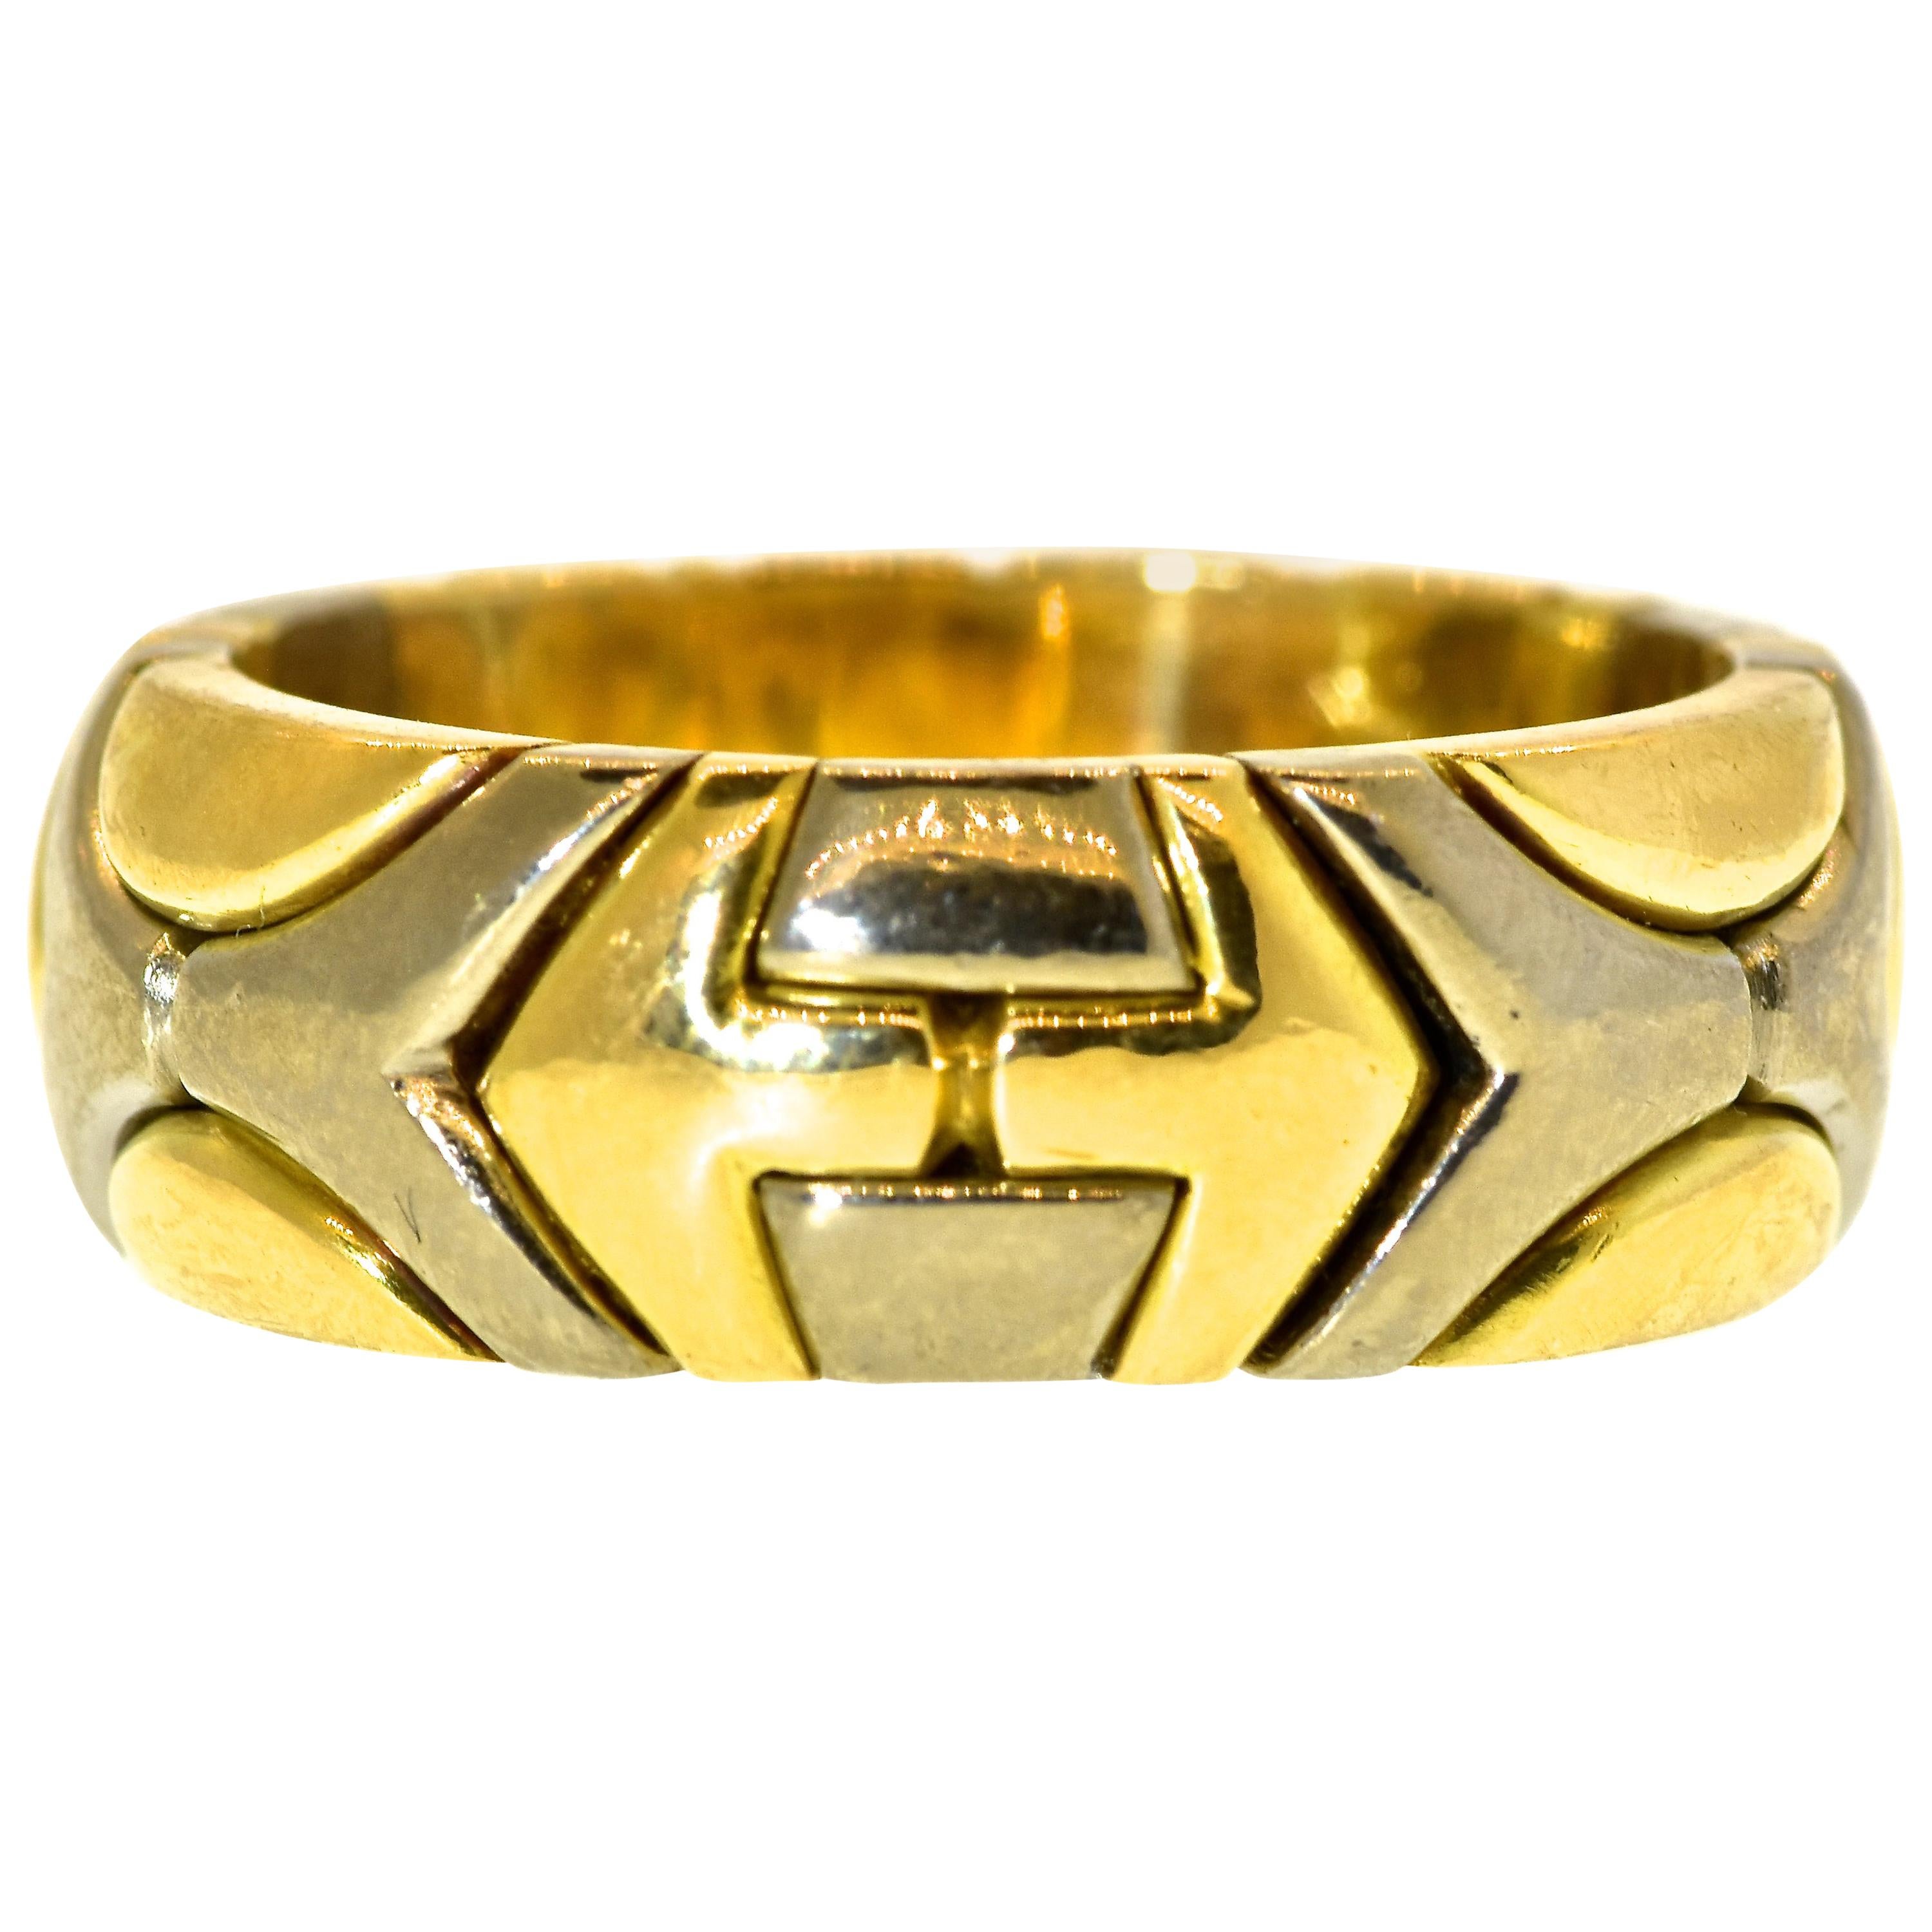 Ring band of 18K white and yellow gold, slightly rounded top,  in a contemporary design, but a vintage ring, weighing a hefty 15.9 grams.  This  band ring is of Bulgari type but bears no marks  -probably because it was sized at some time in the